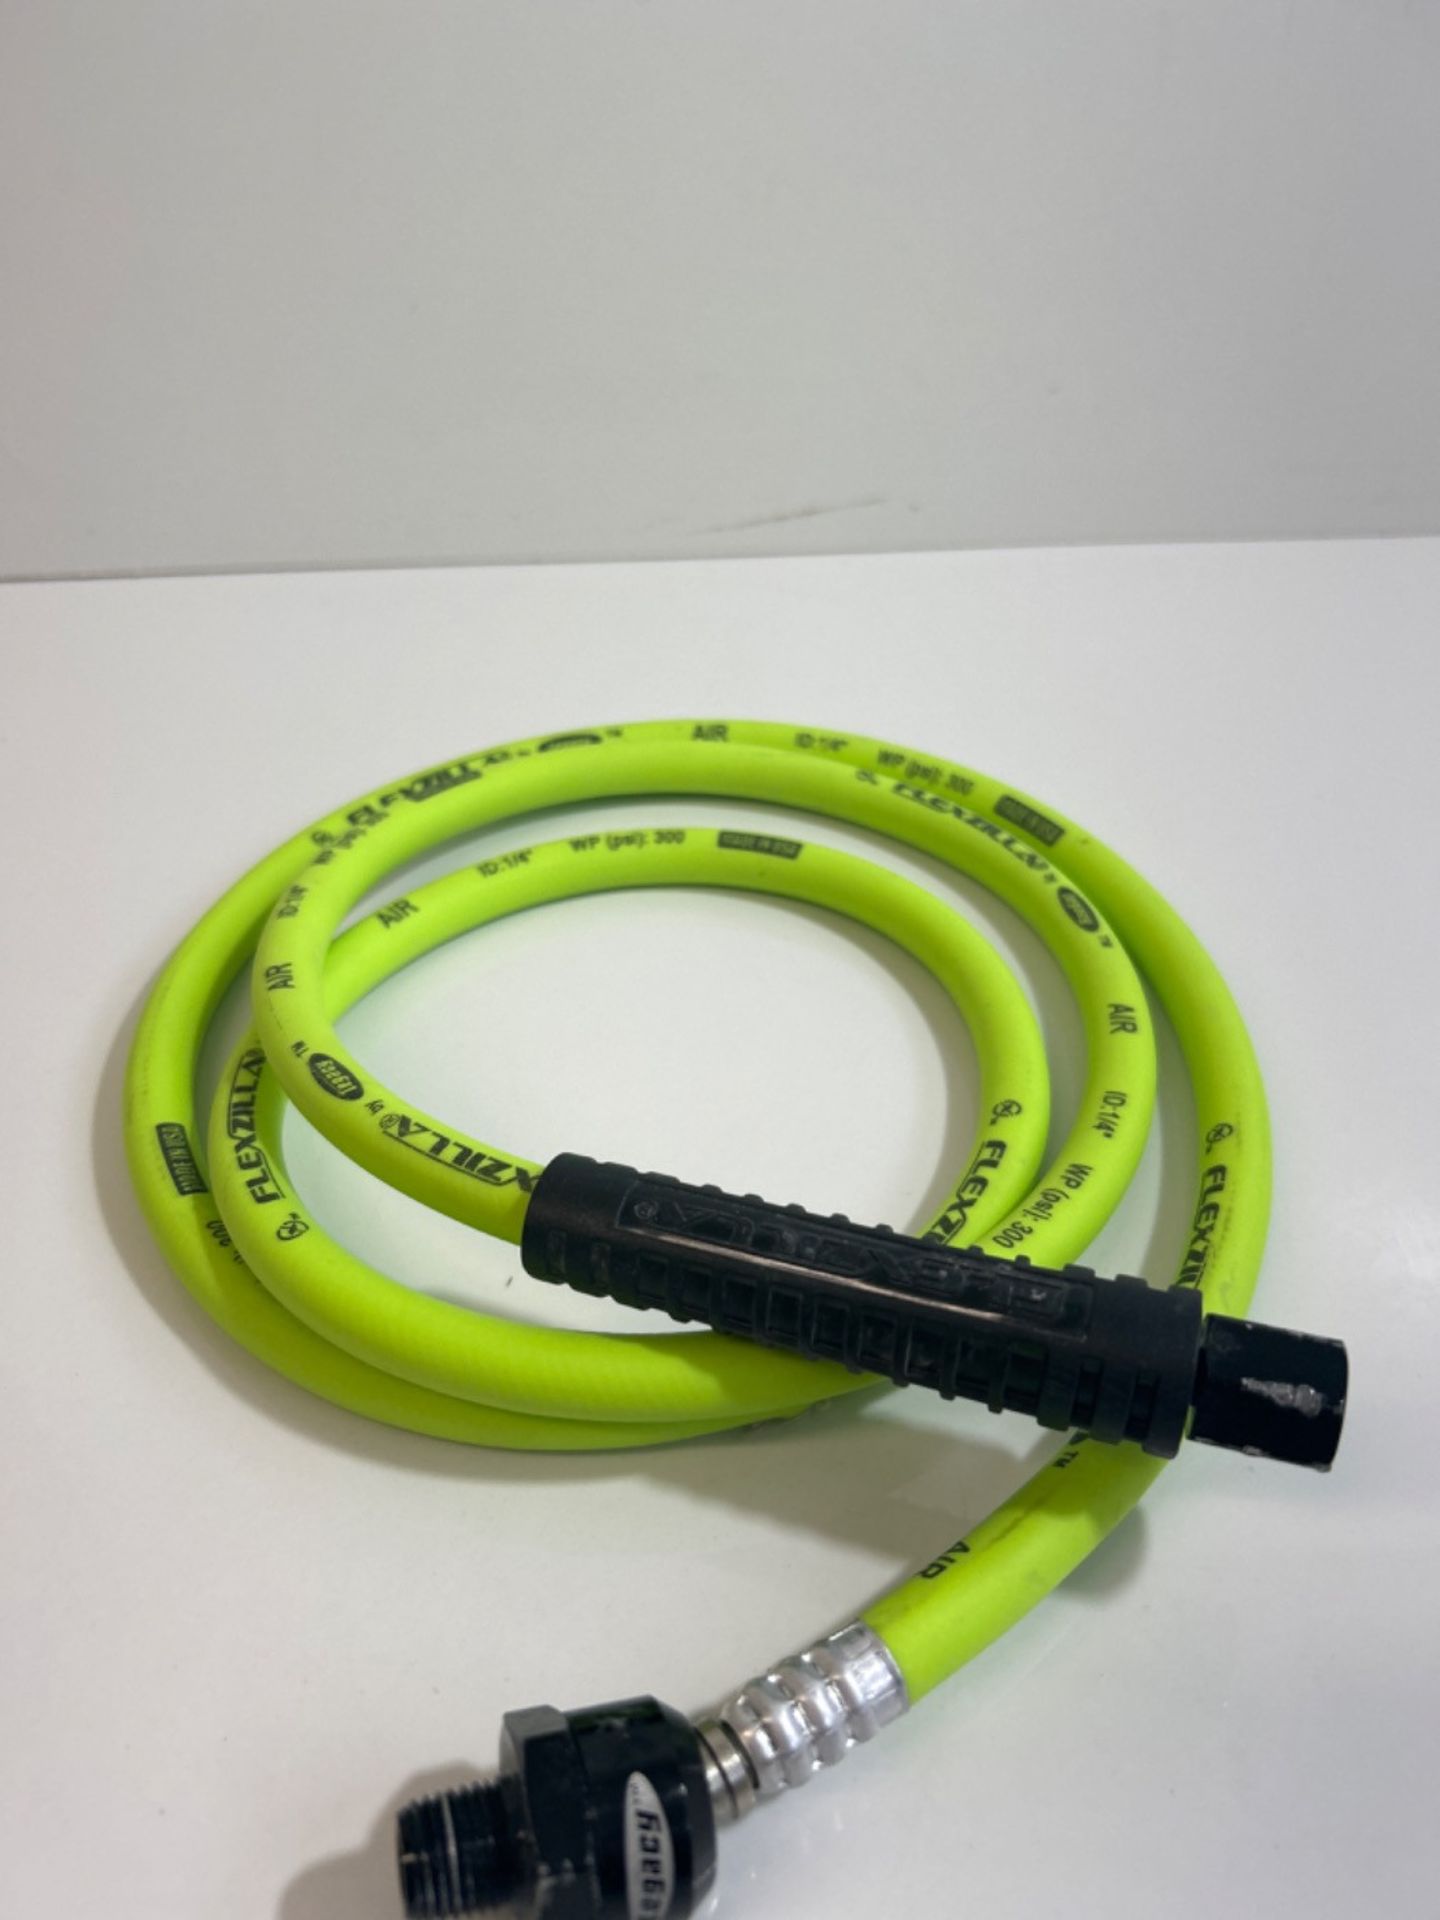 Flexzilla Ball Swivel Whip Air Hose, 1/4 in. x 4 ft. (1/4 in. MNPT Ball Swivel x 1/4 in. FNPT Ends) - Image 3 of 3